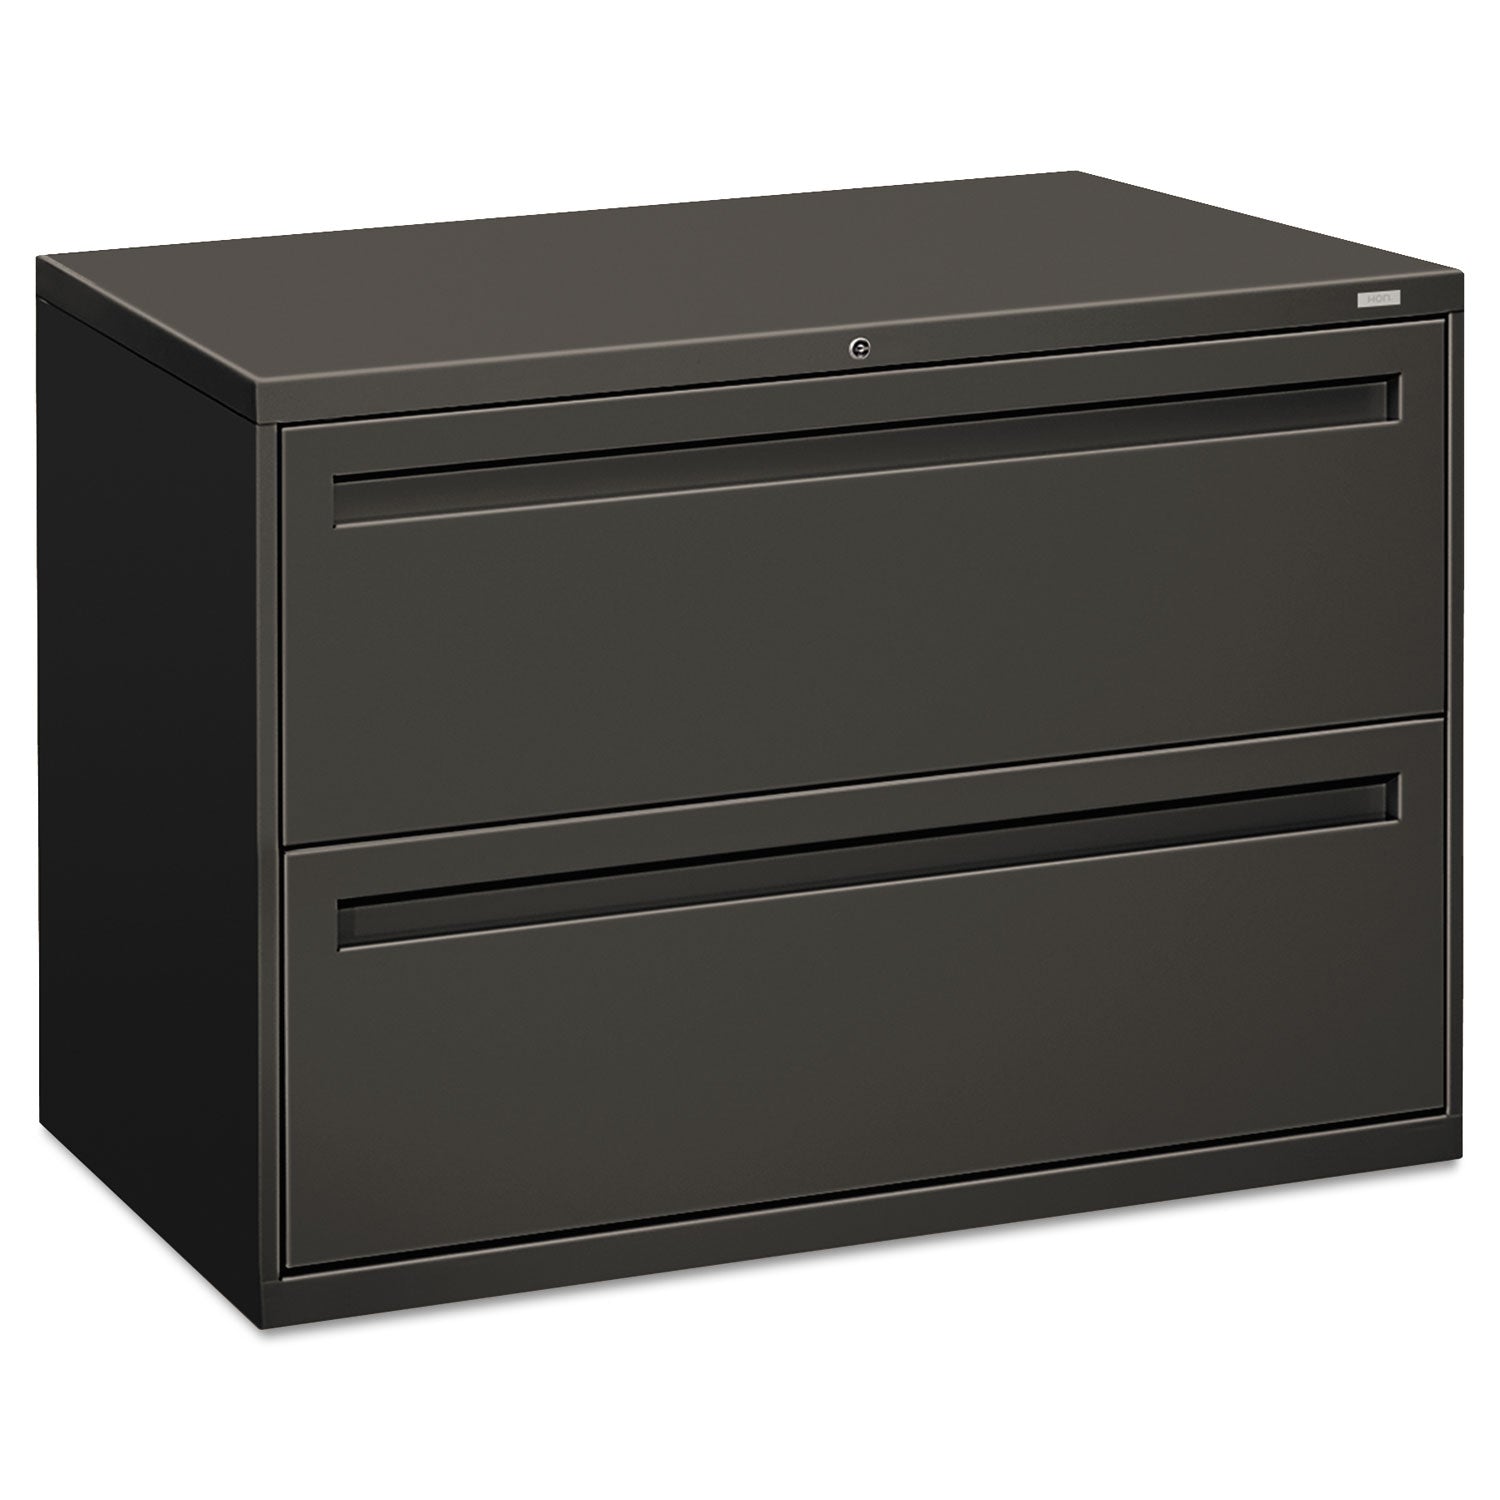 Brigade 700 Series Lateral File, 2 Legal/Letter-Size File Drawers, Charcoal, 42" x 18" x 28 - 